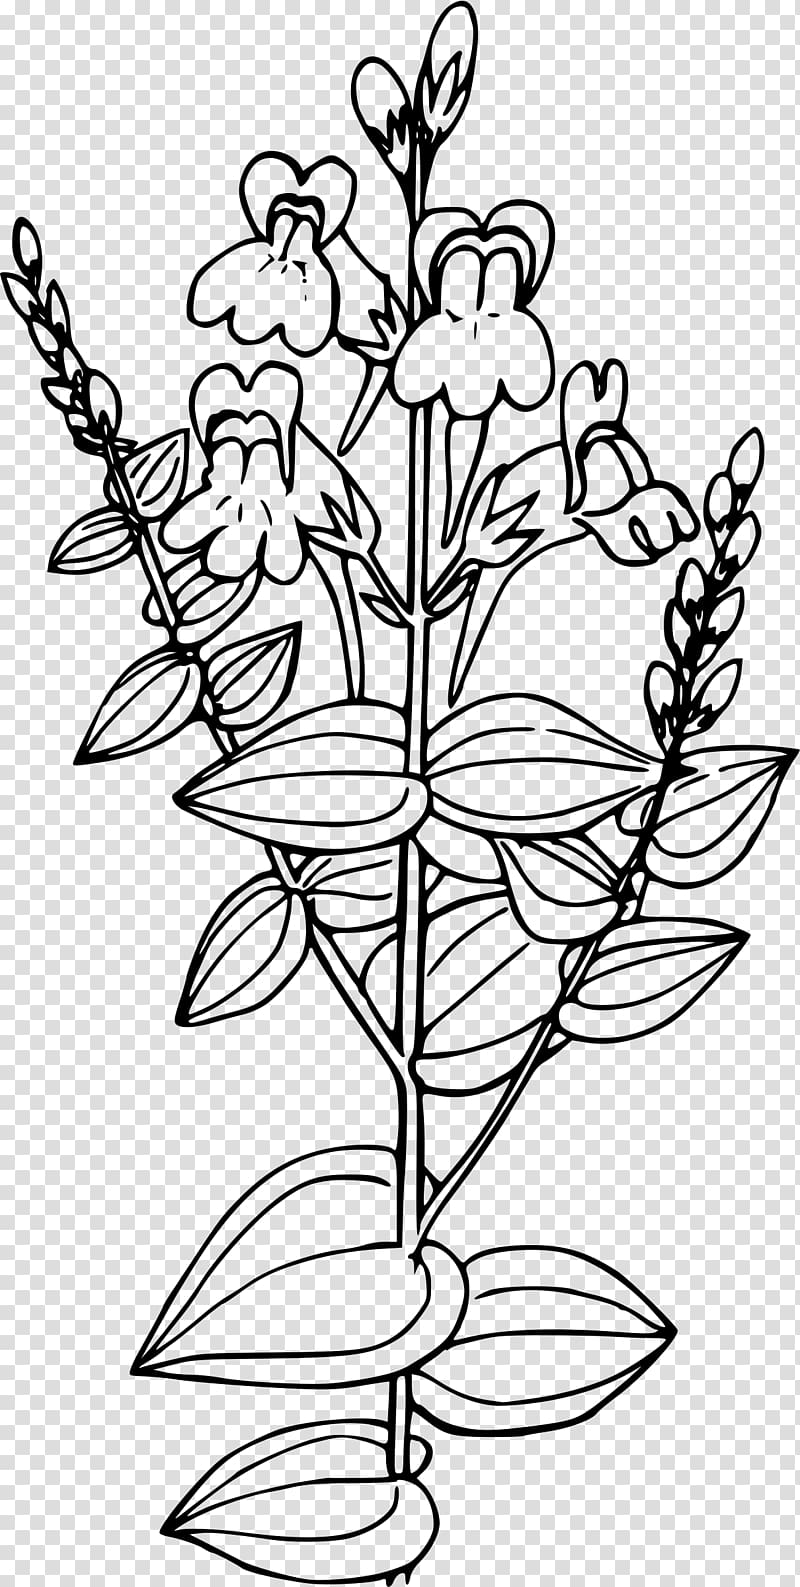 Linaria vulgaris , others transparent background PNG clipart